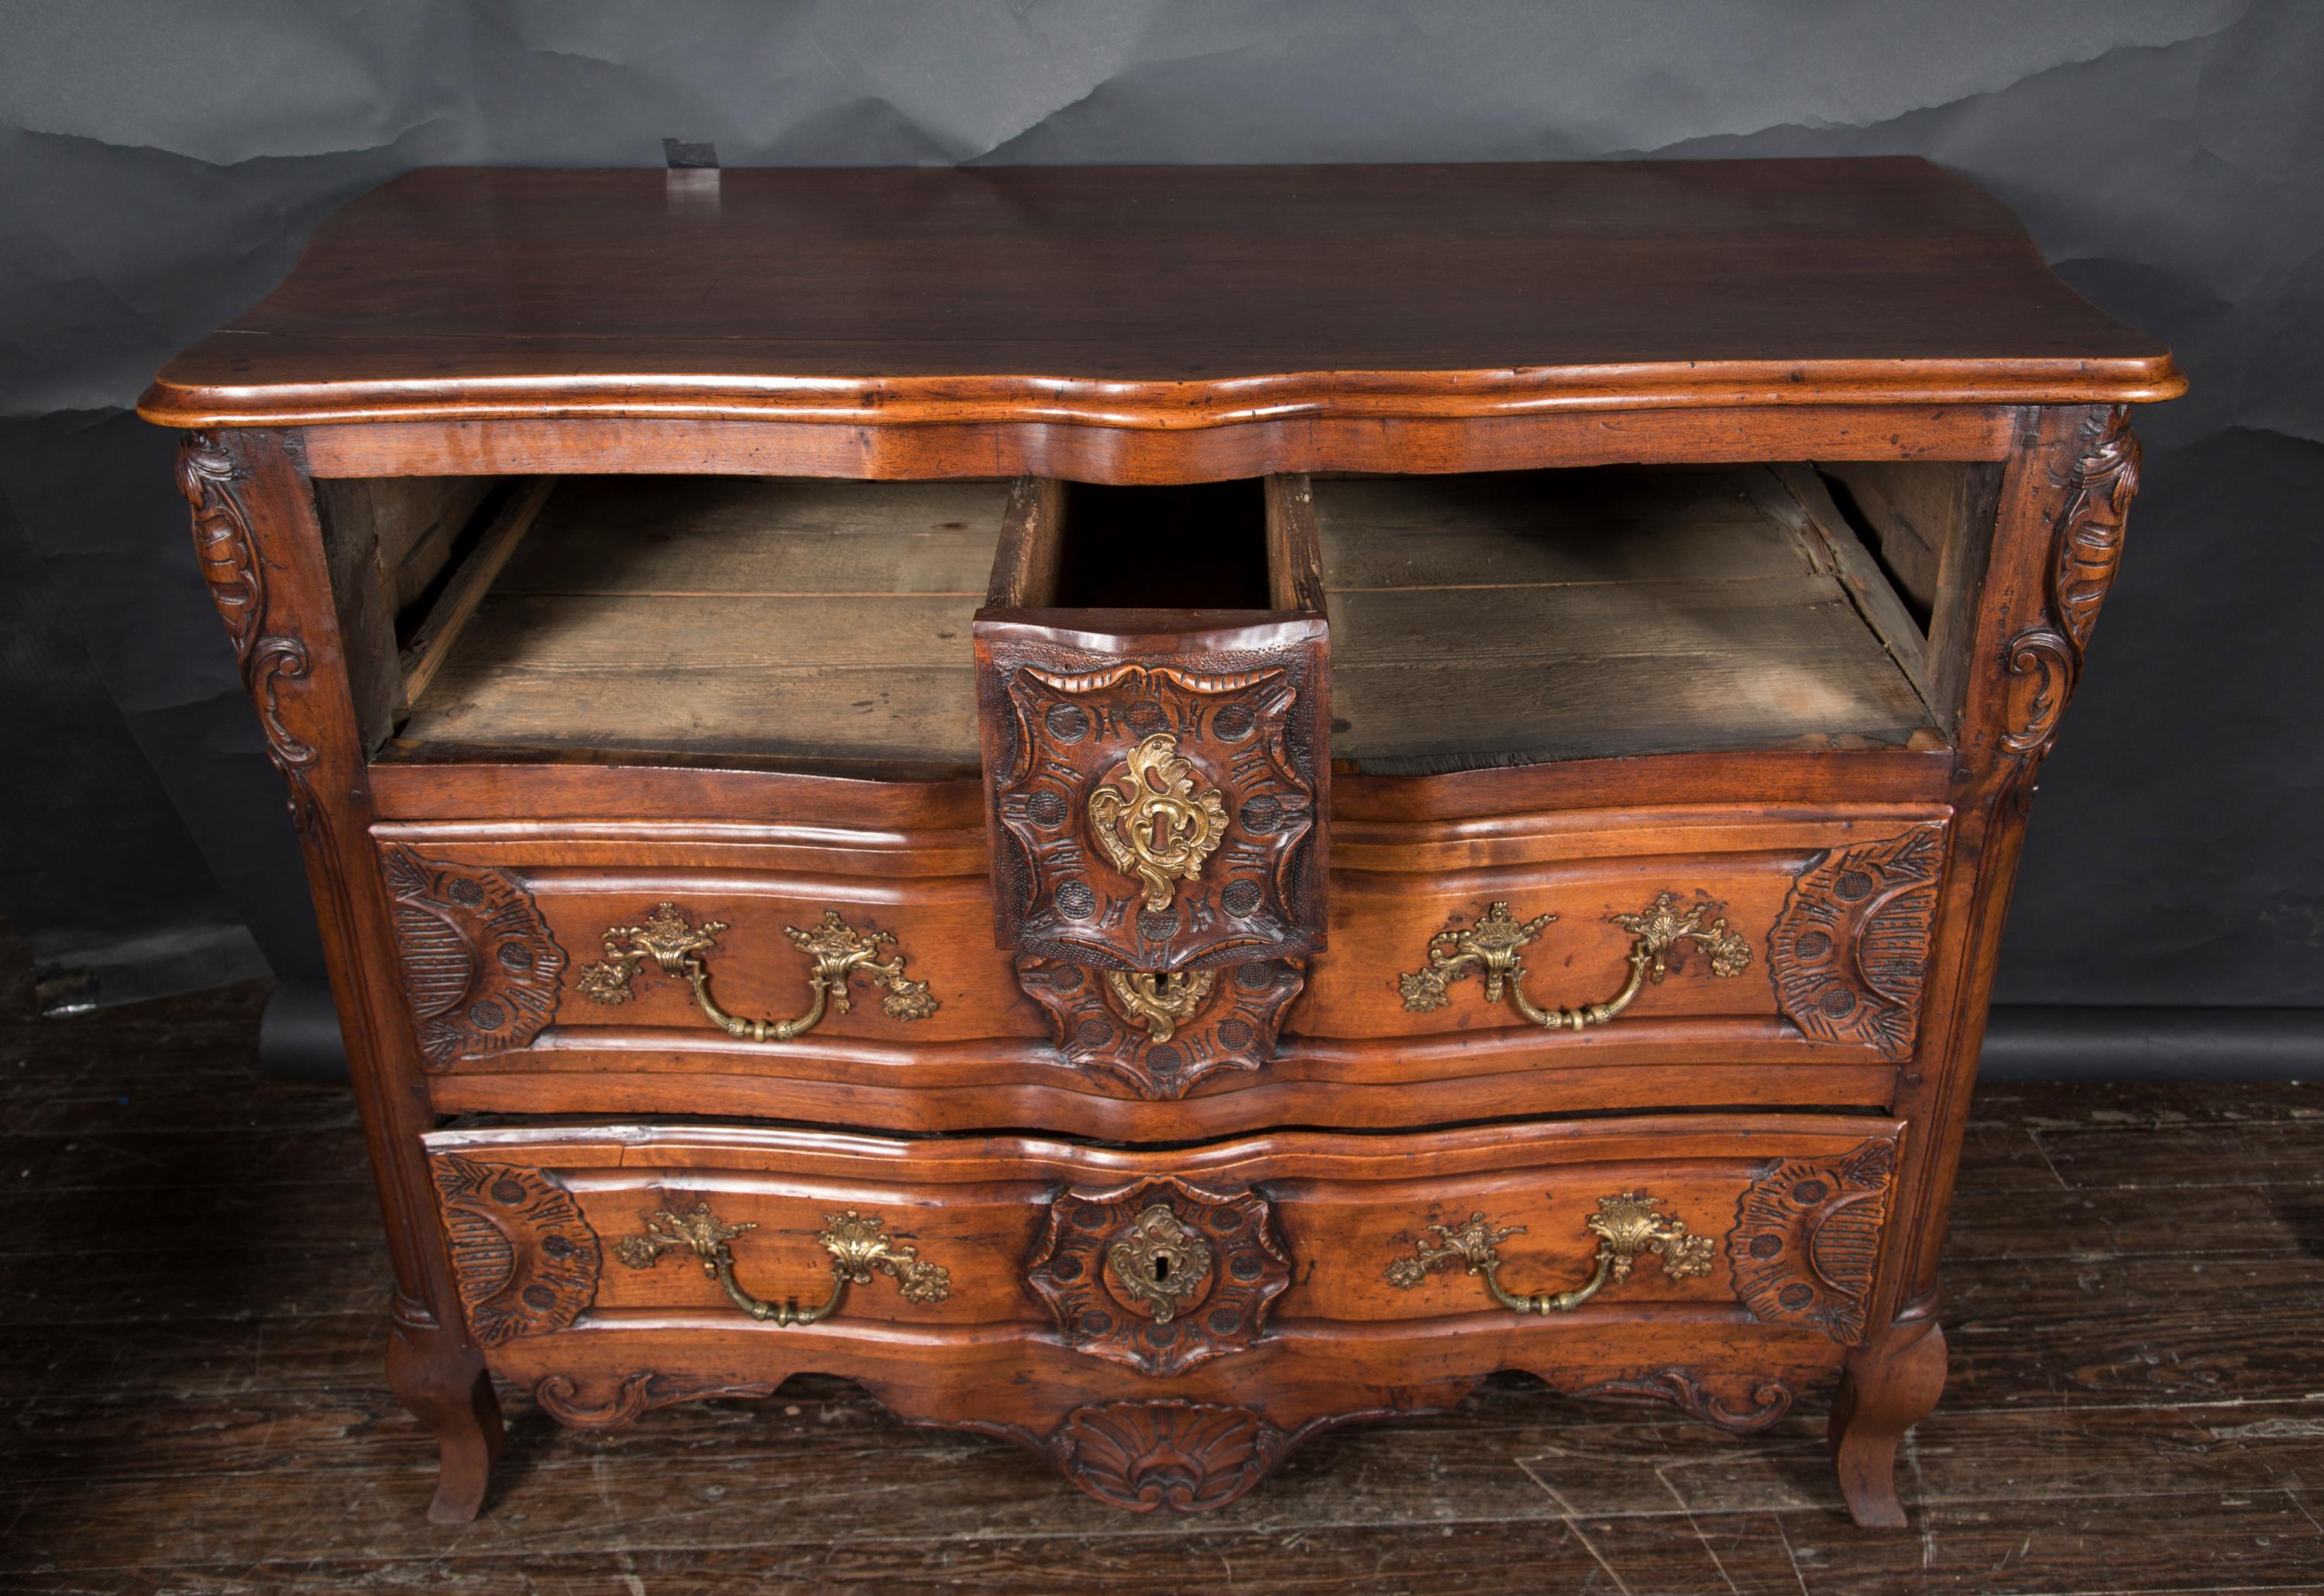 Early 18th Century Regence Period Lyonnaise Walnut Commode / Chest of Drawers For Sale 1